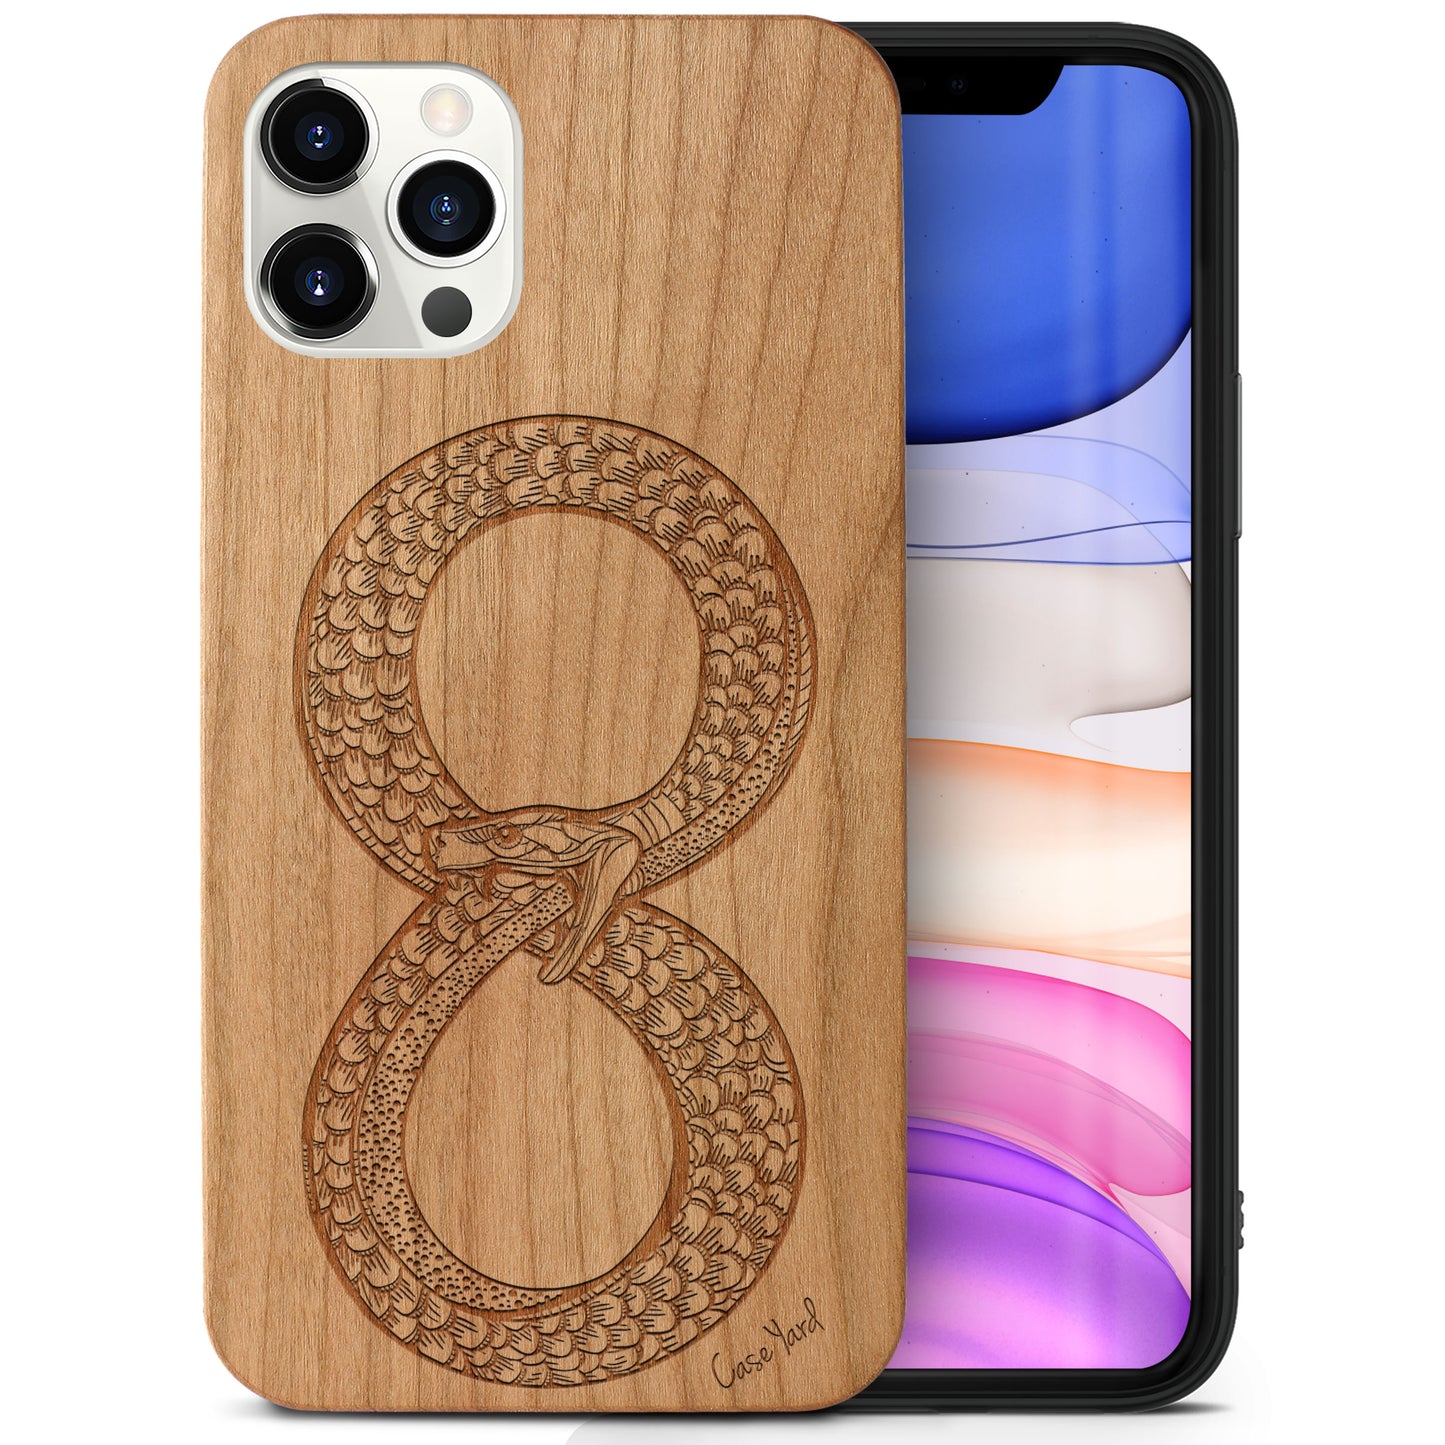 Wooden Cell Phone Case Cover, Laser Engraved case for iPhone & Samsung phone Eternal Life Design